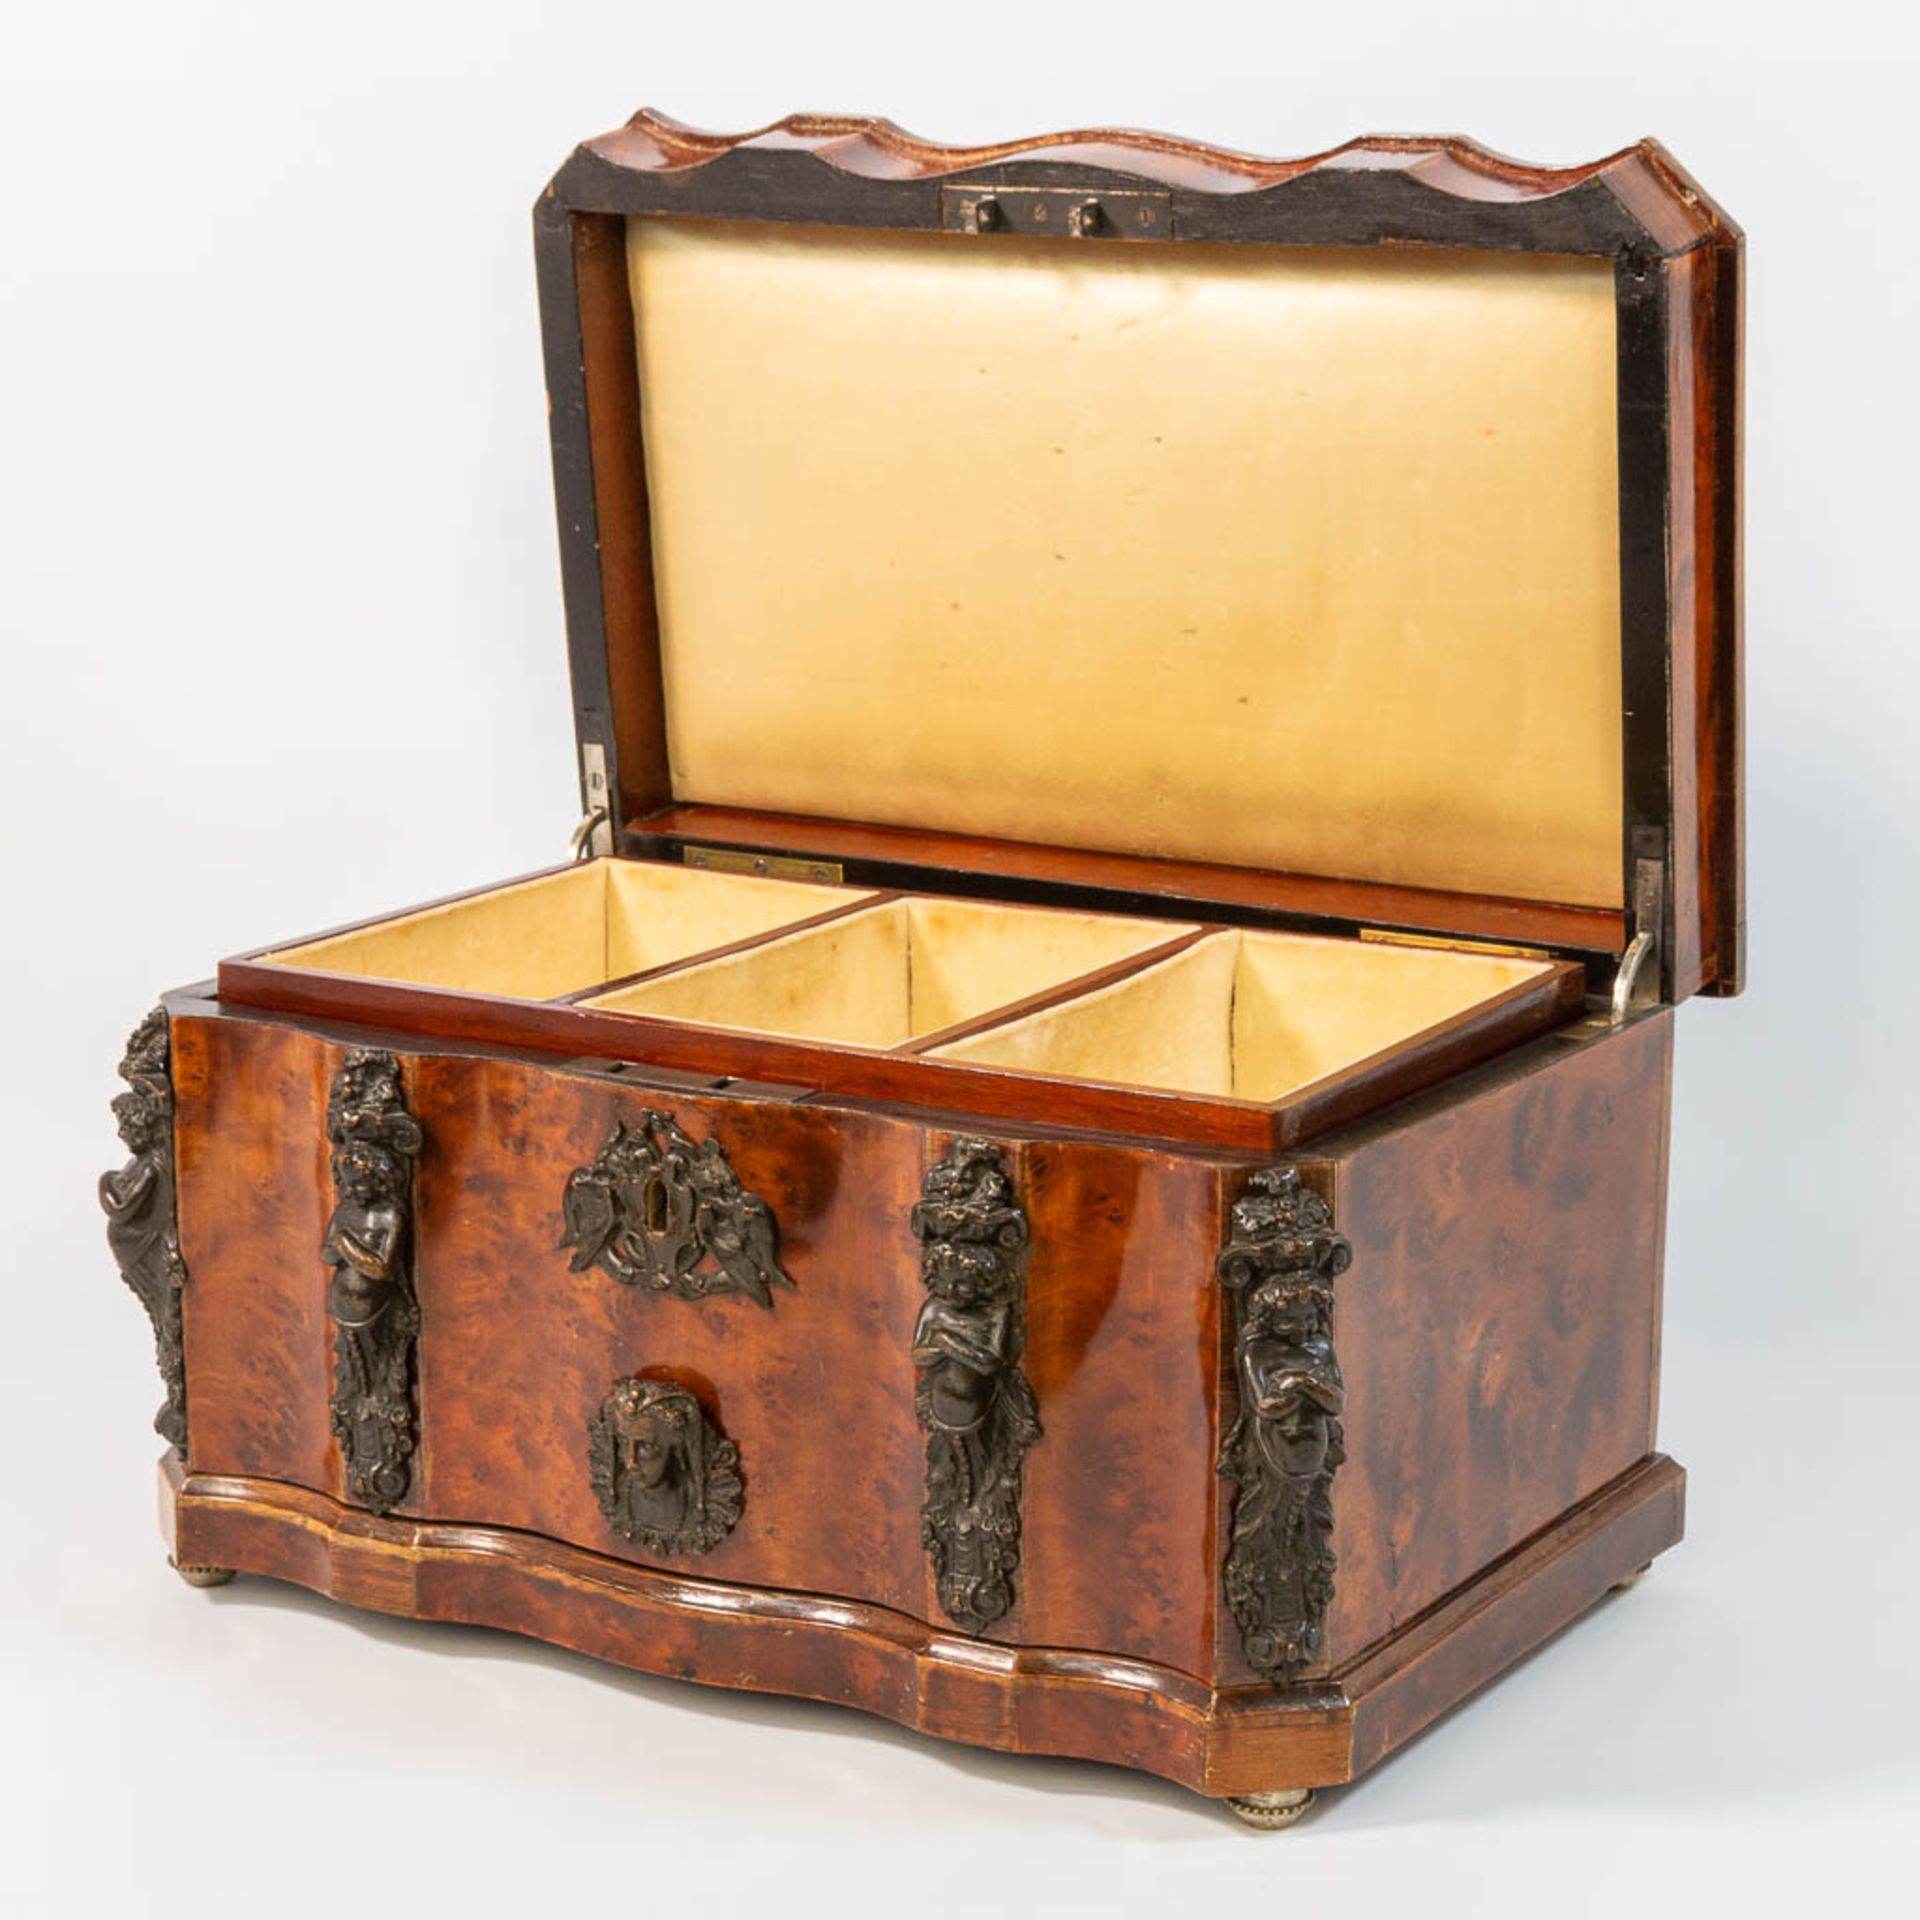 An antique Jewellry box, made of root wood and mounted with bonze hunting scenes, 19th century. - Bild 12 aus 20